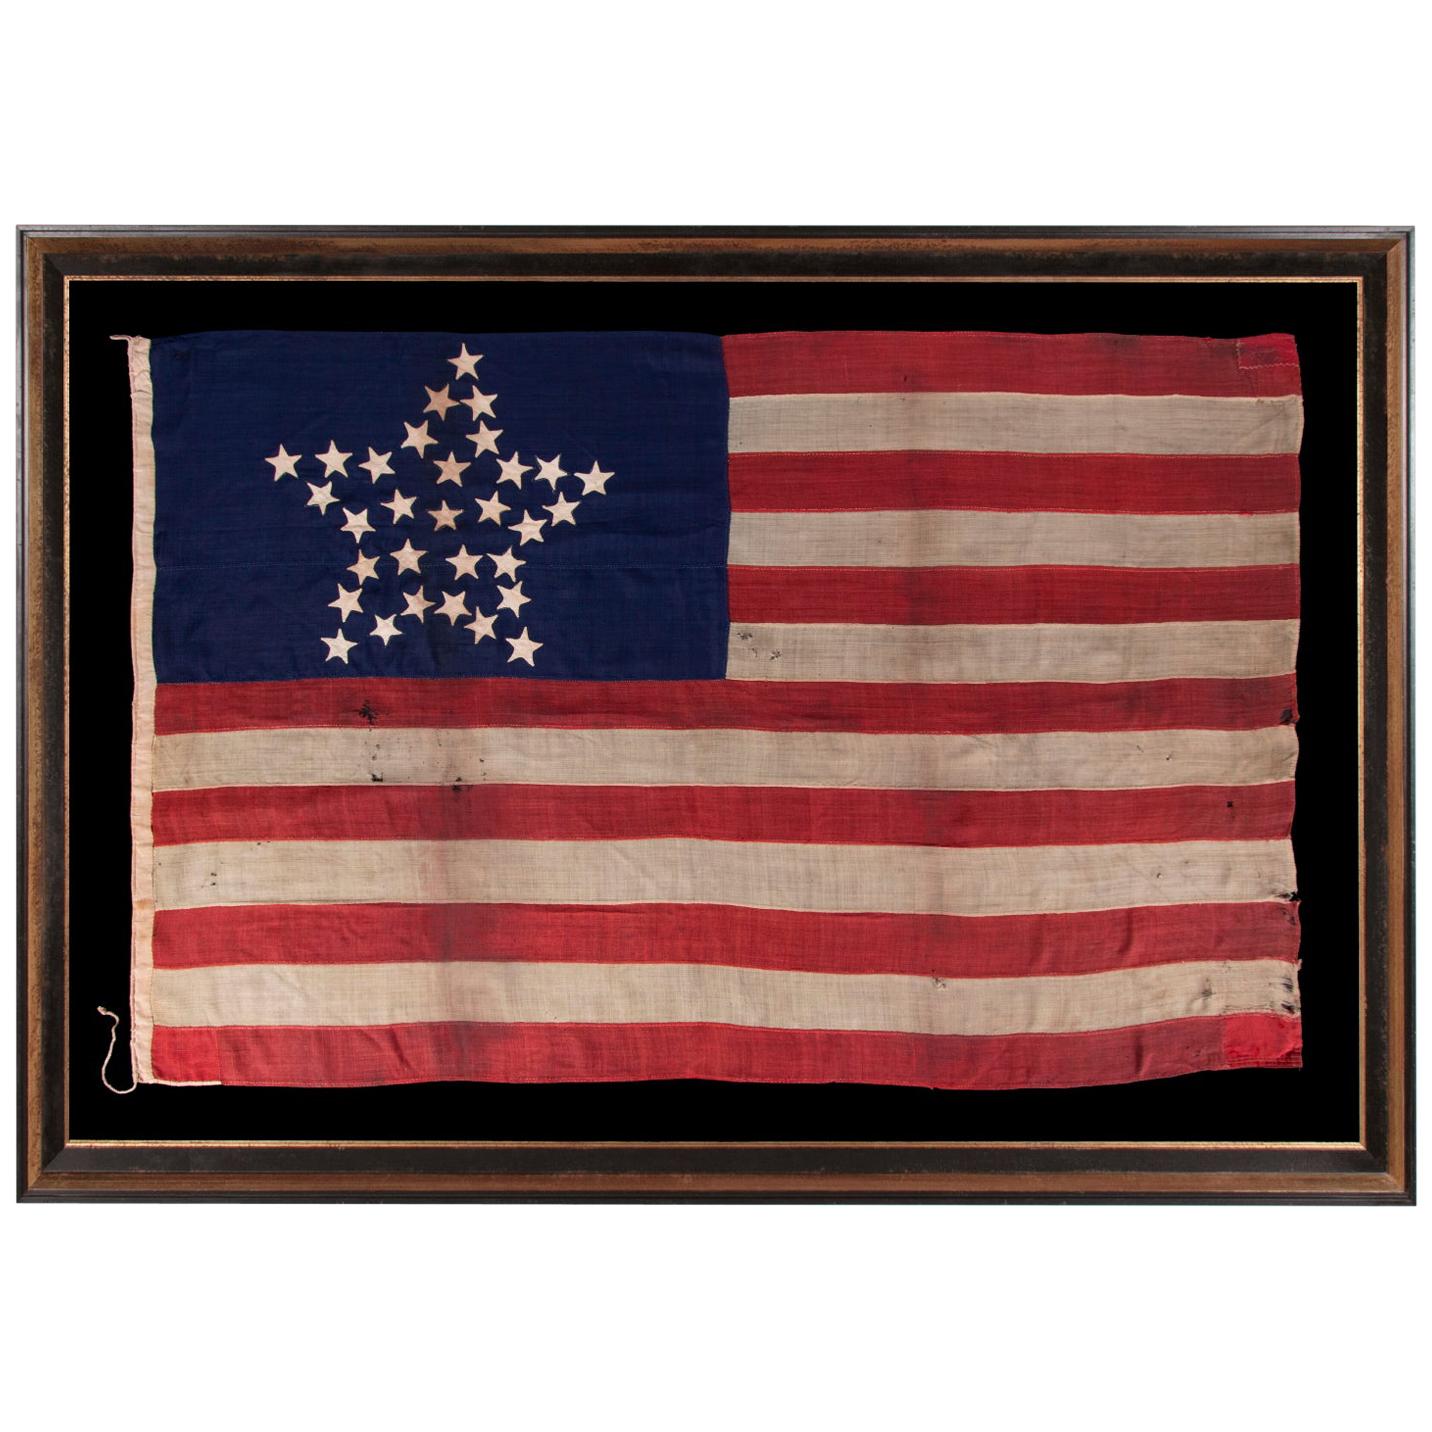 Antique American Flag with 31 Stars Arranged in the "Great Star" Pattern